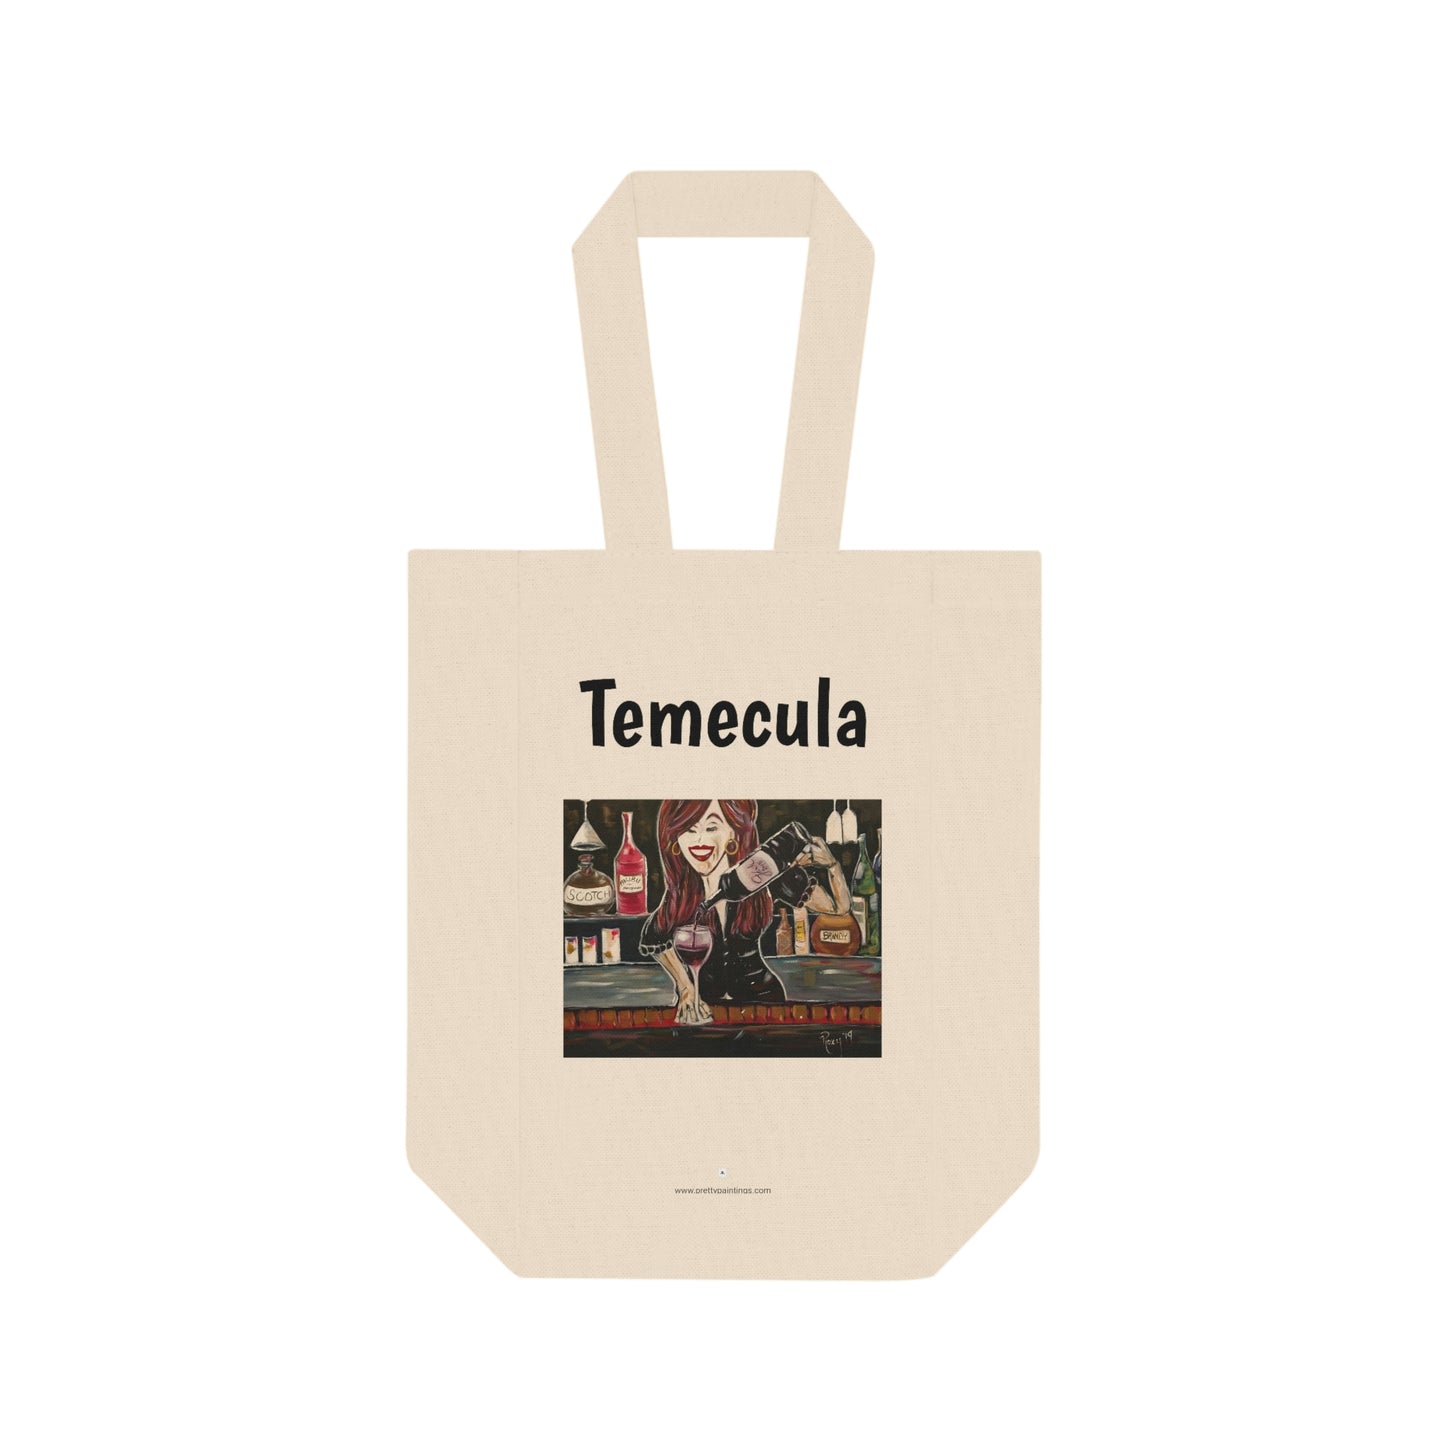 Temecula Double Wine Tote Bag featuring "Sassy Notes" painting